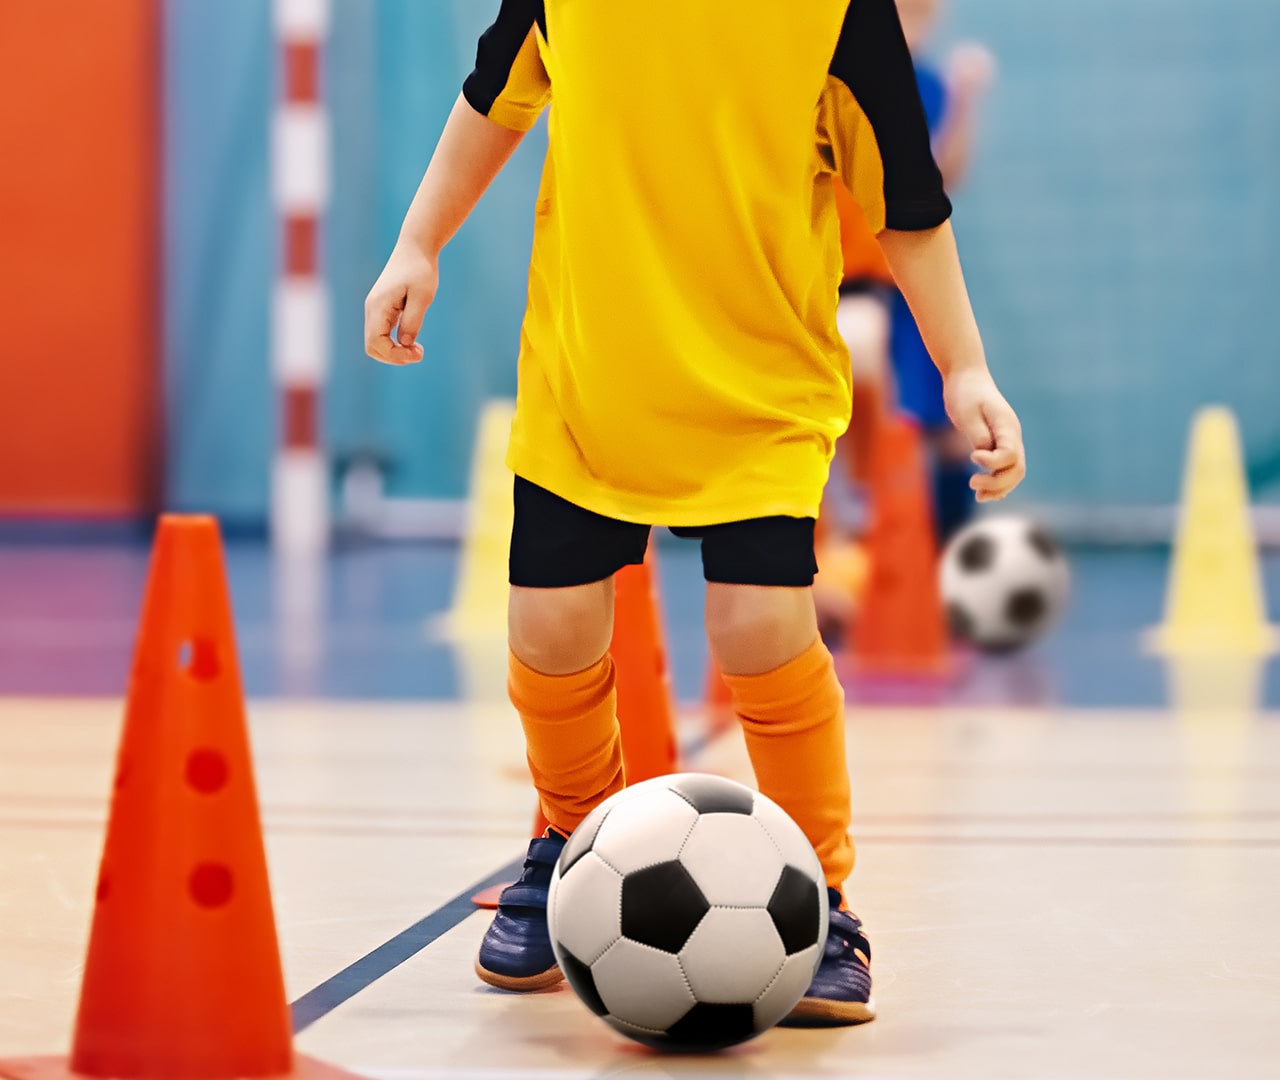 Child, soccer ball and cones, indoors